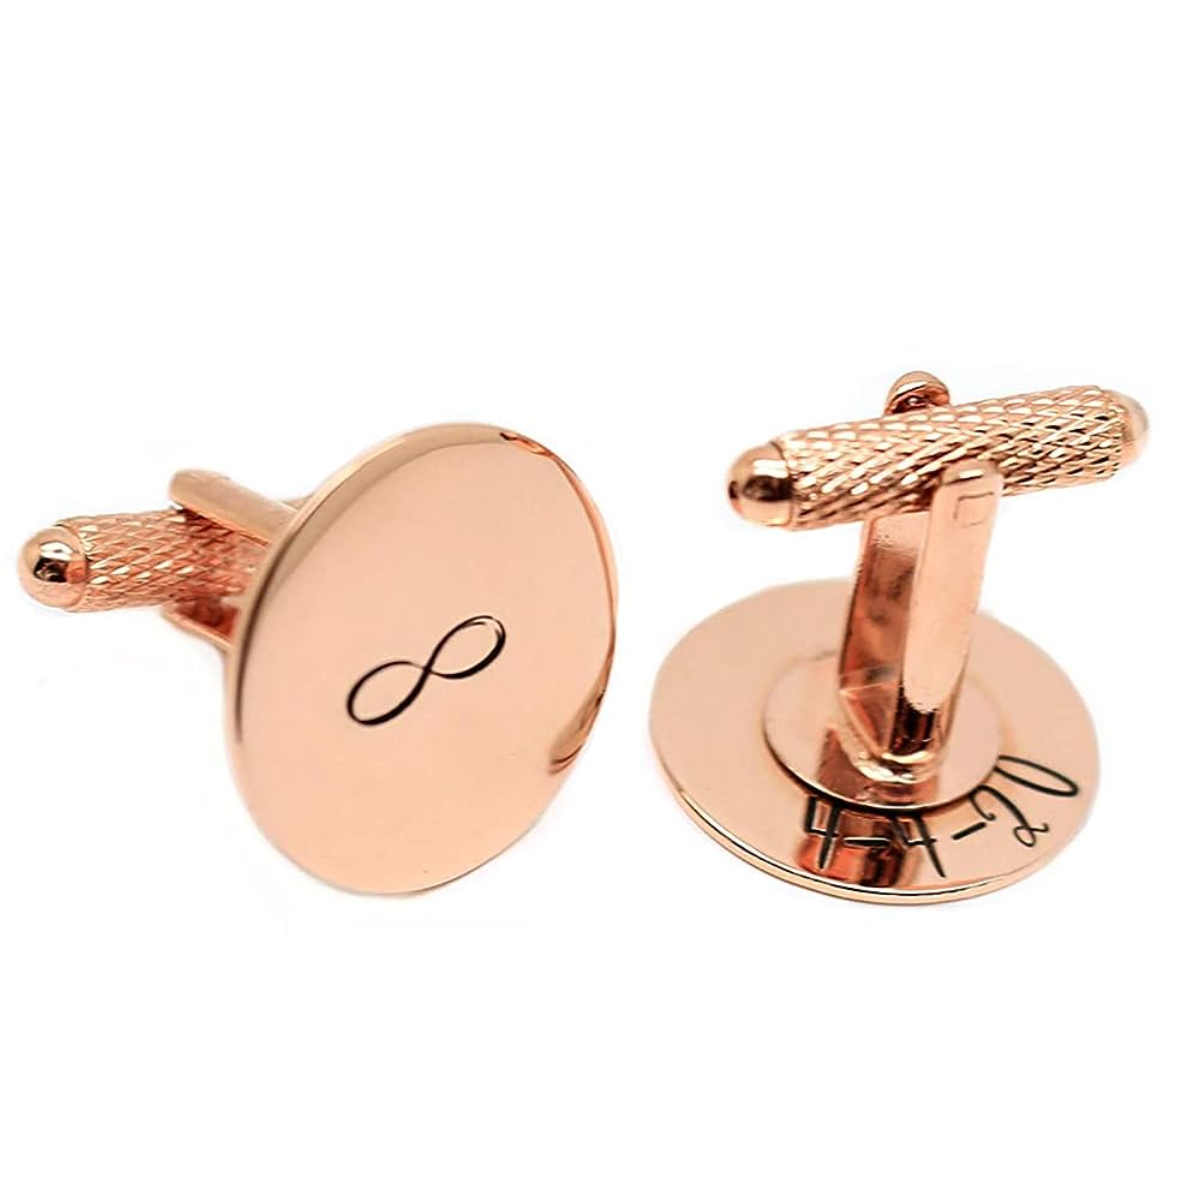 4. Handcrafted Copper Cufflinks: A Unique and Thoughtful 10th Anniversary Gift for Him